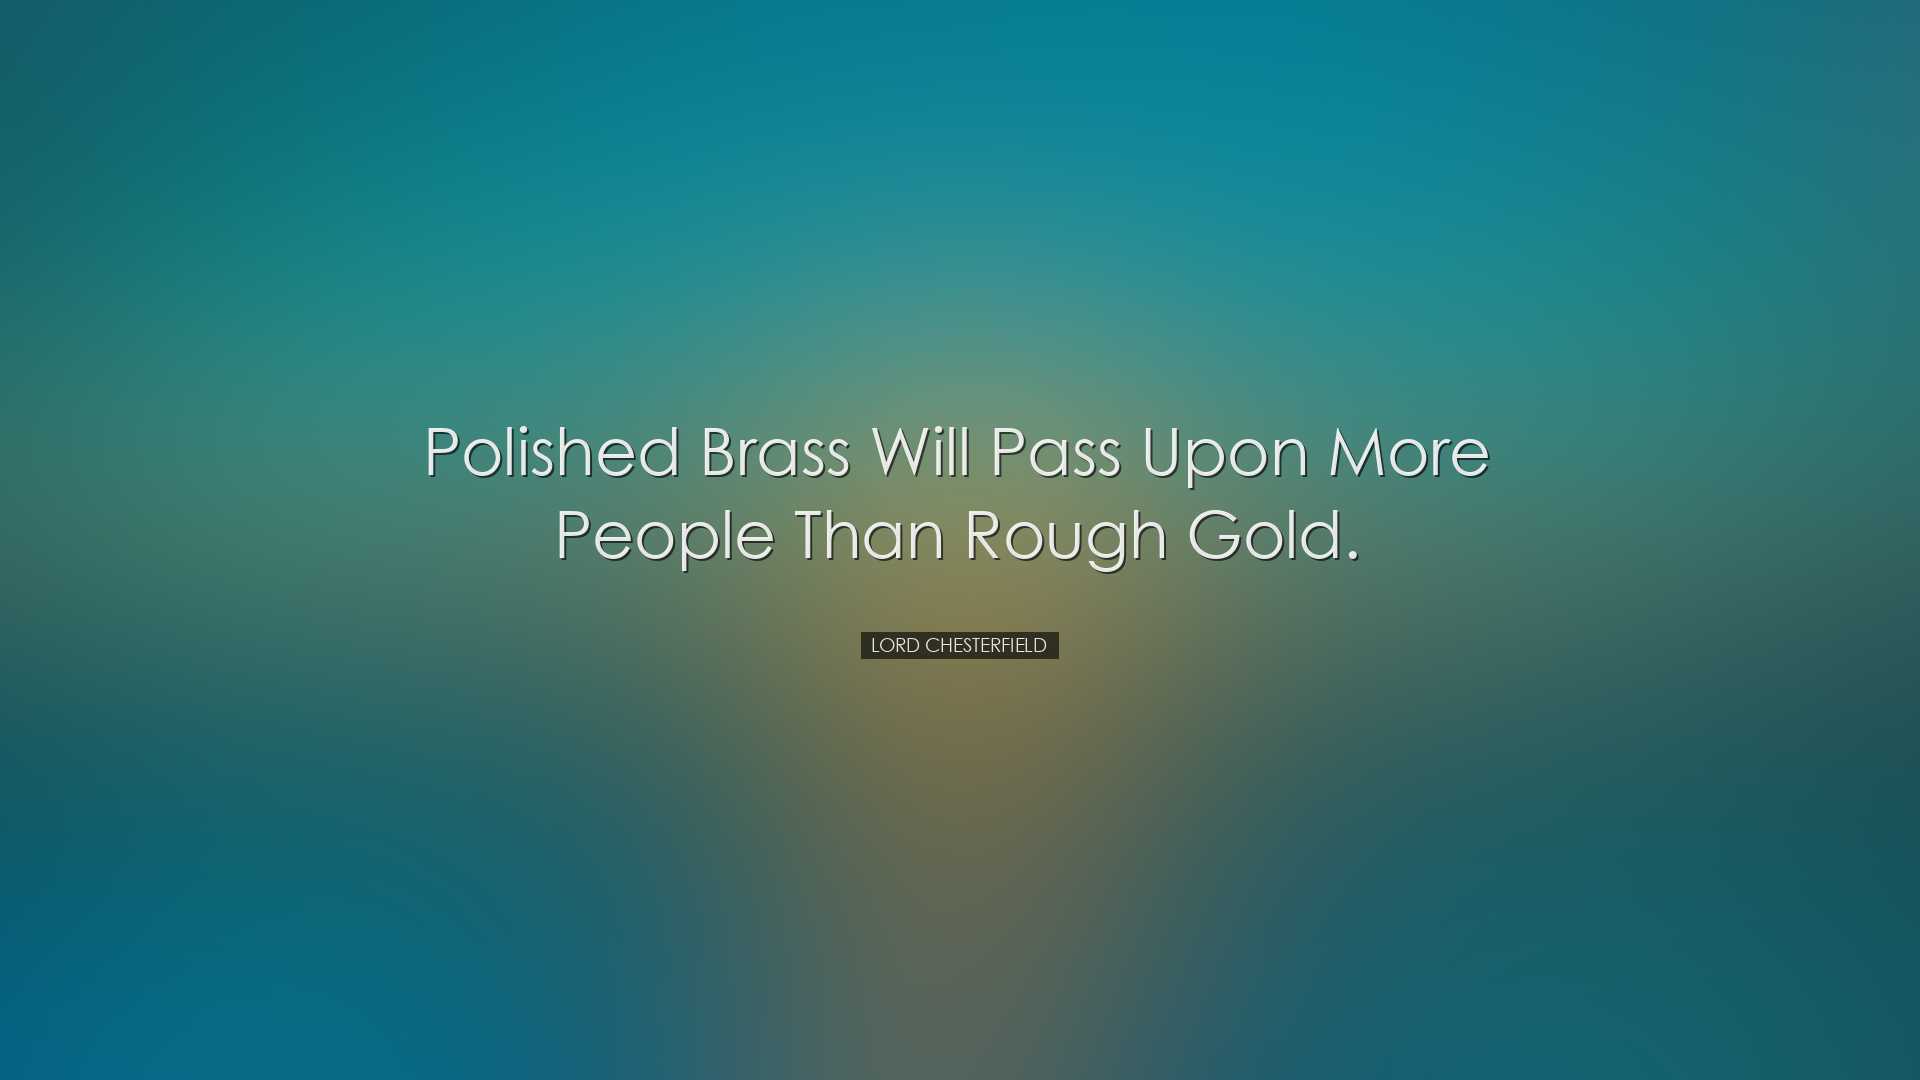 Polished brass will pass upon more people than rough gold. - Lord